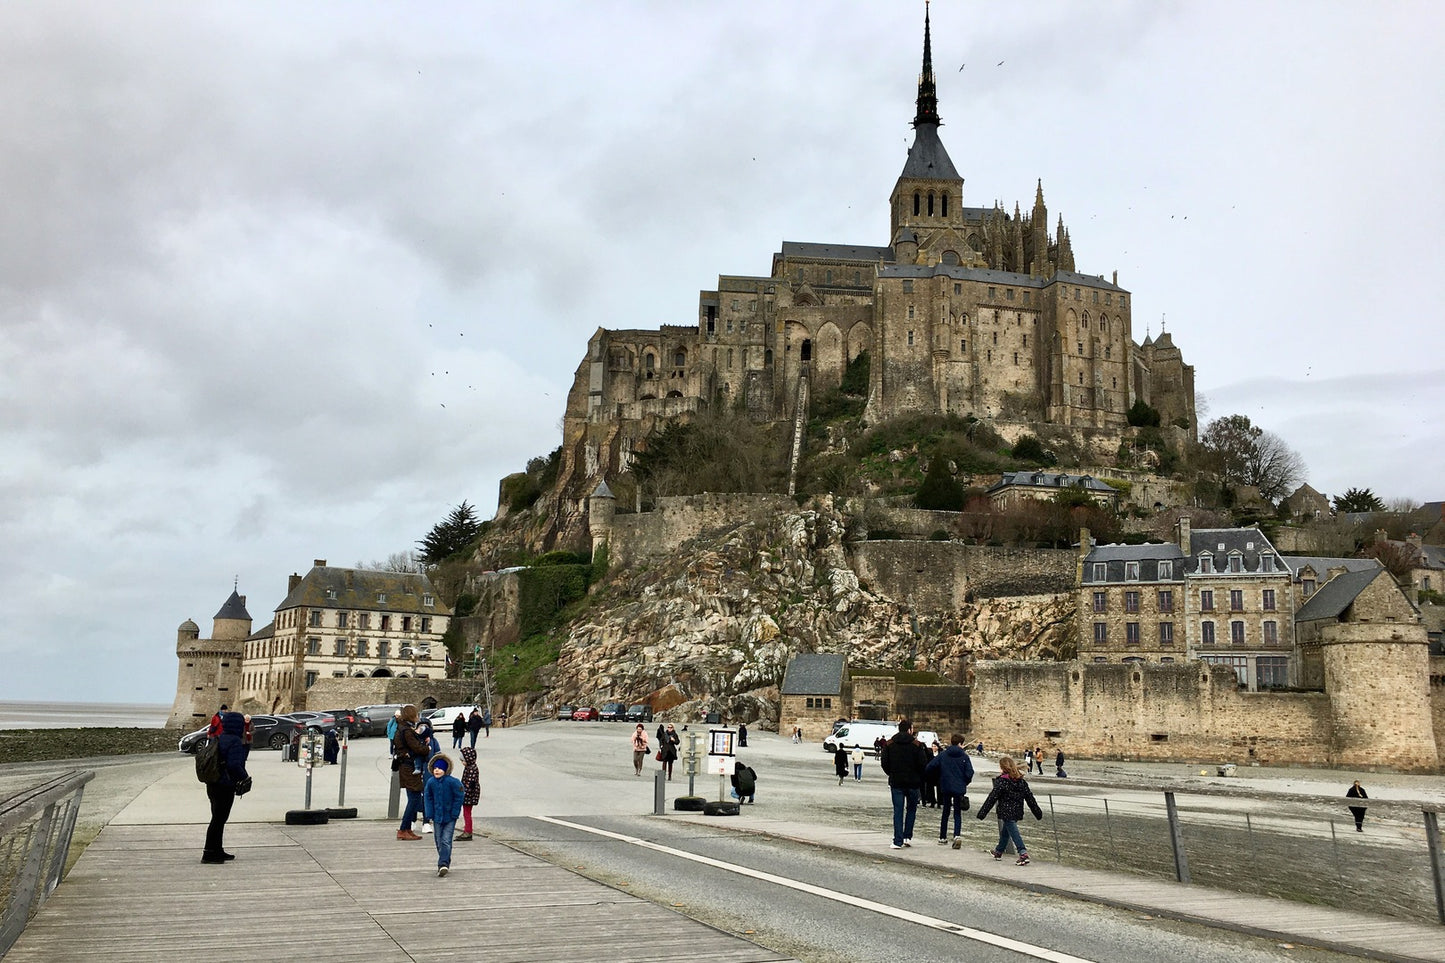 2-Day Private Tour from Paris to Mont Saint-Michel and Normandy with Loire Castles Visit